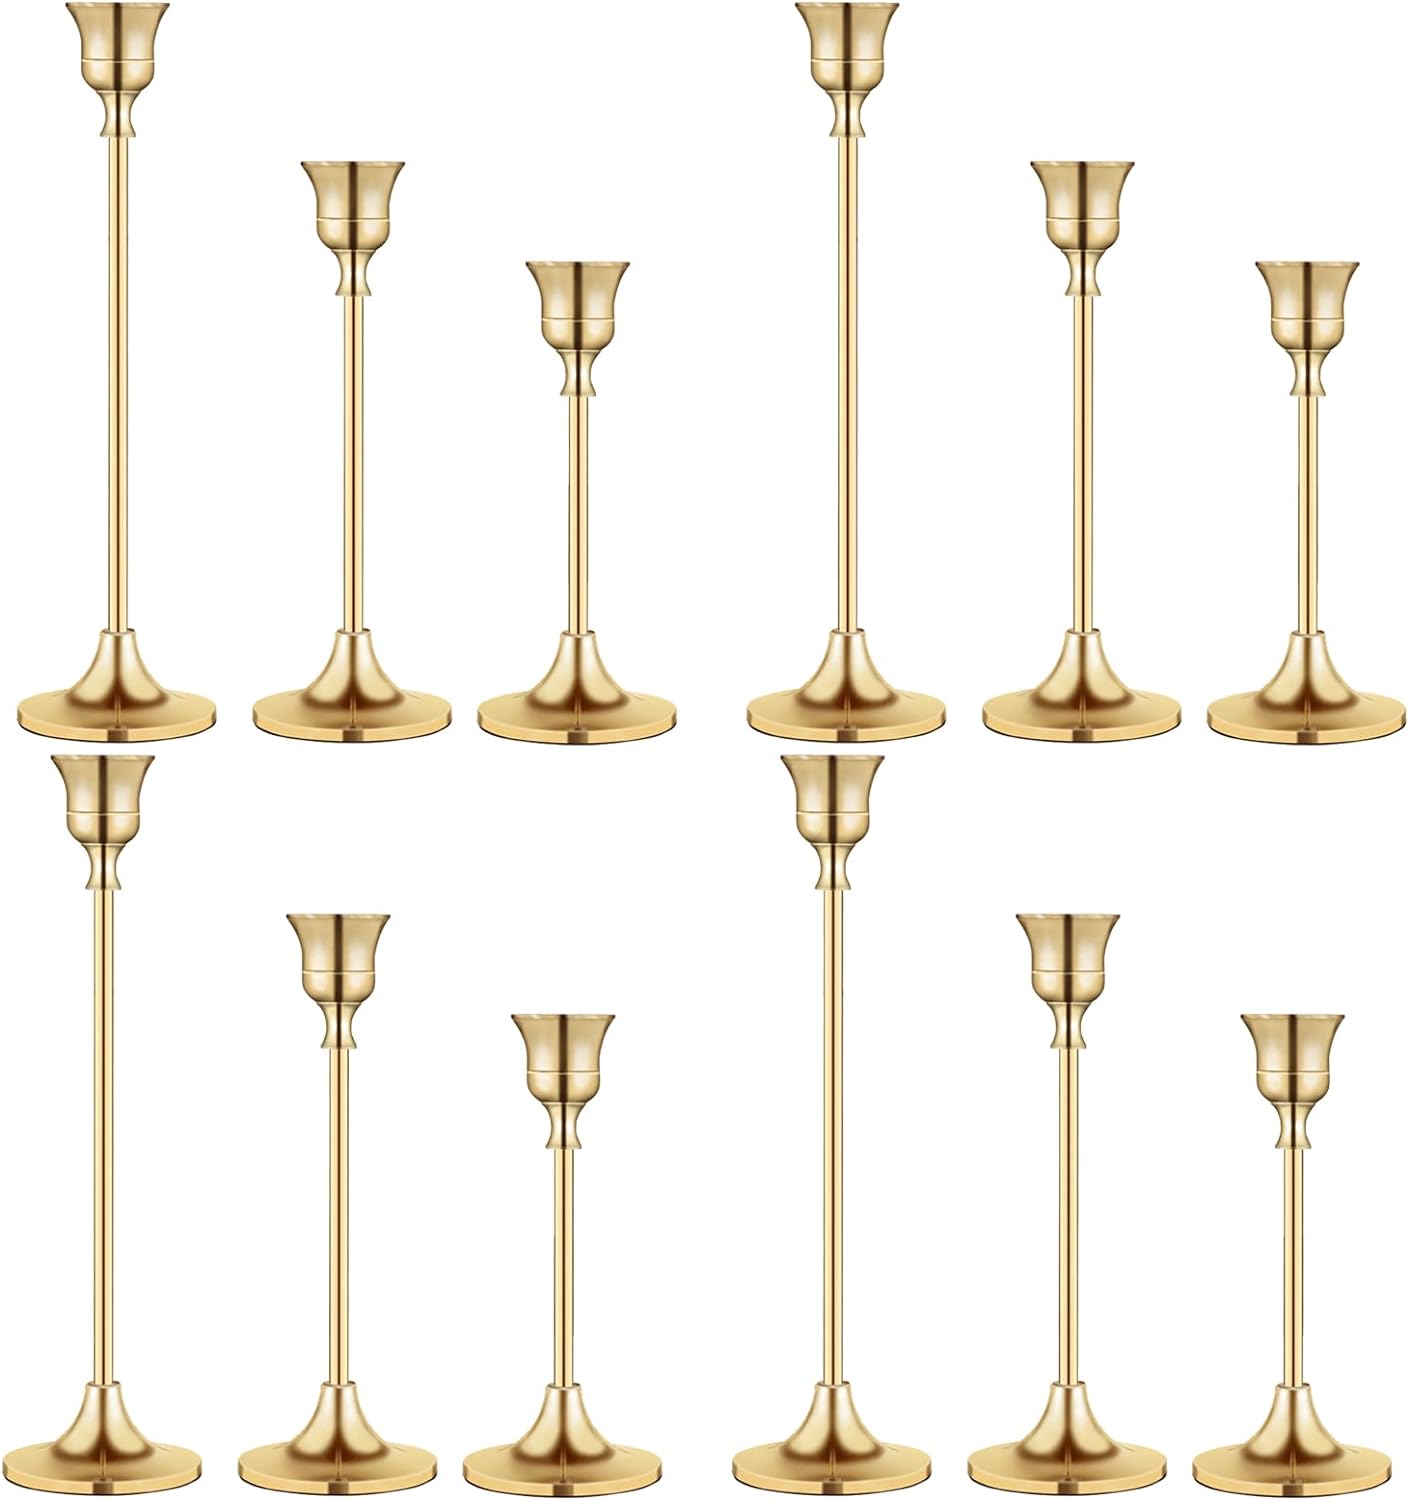 Don't Miss Your Chance to Save on Candlestick Holders - Up to 33% Off!